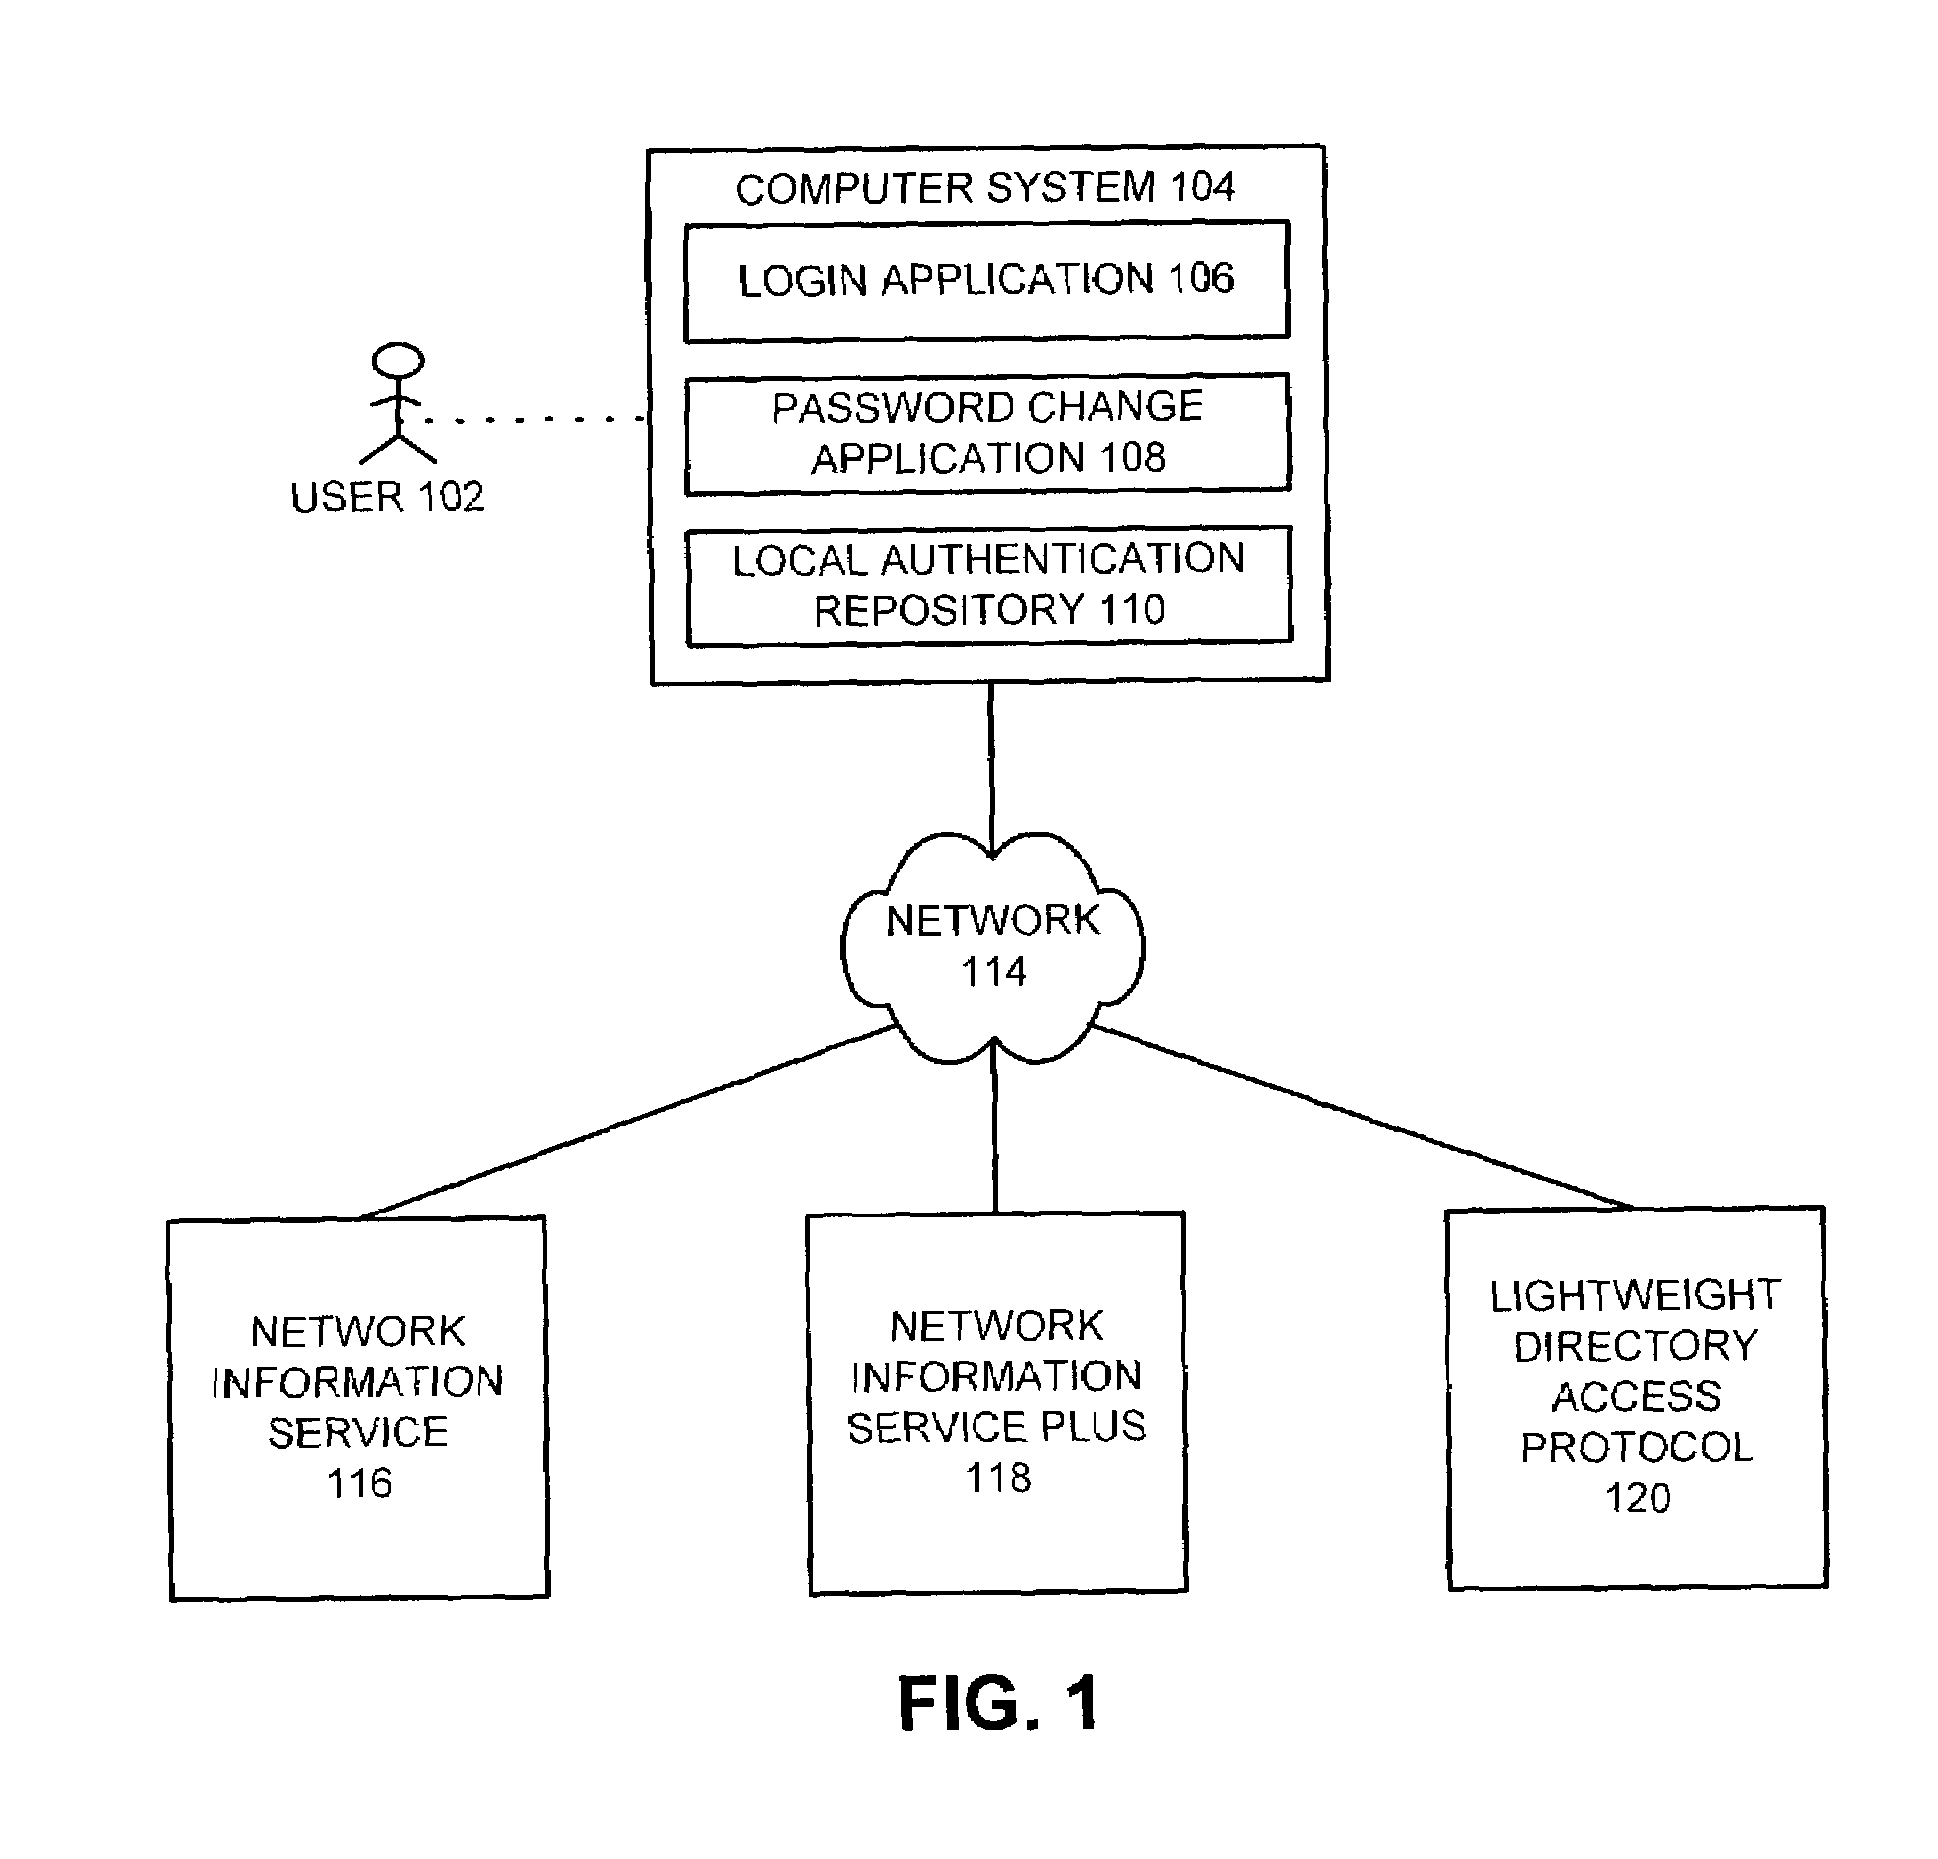 Specifying a repository for an authentication token in a distributed computing system